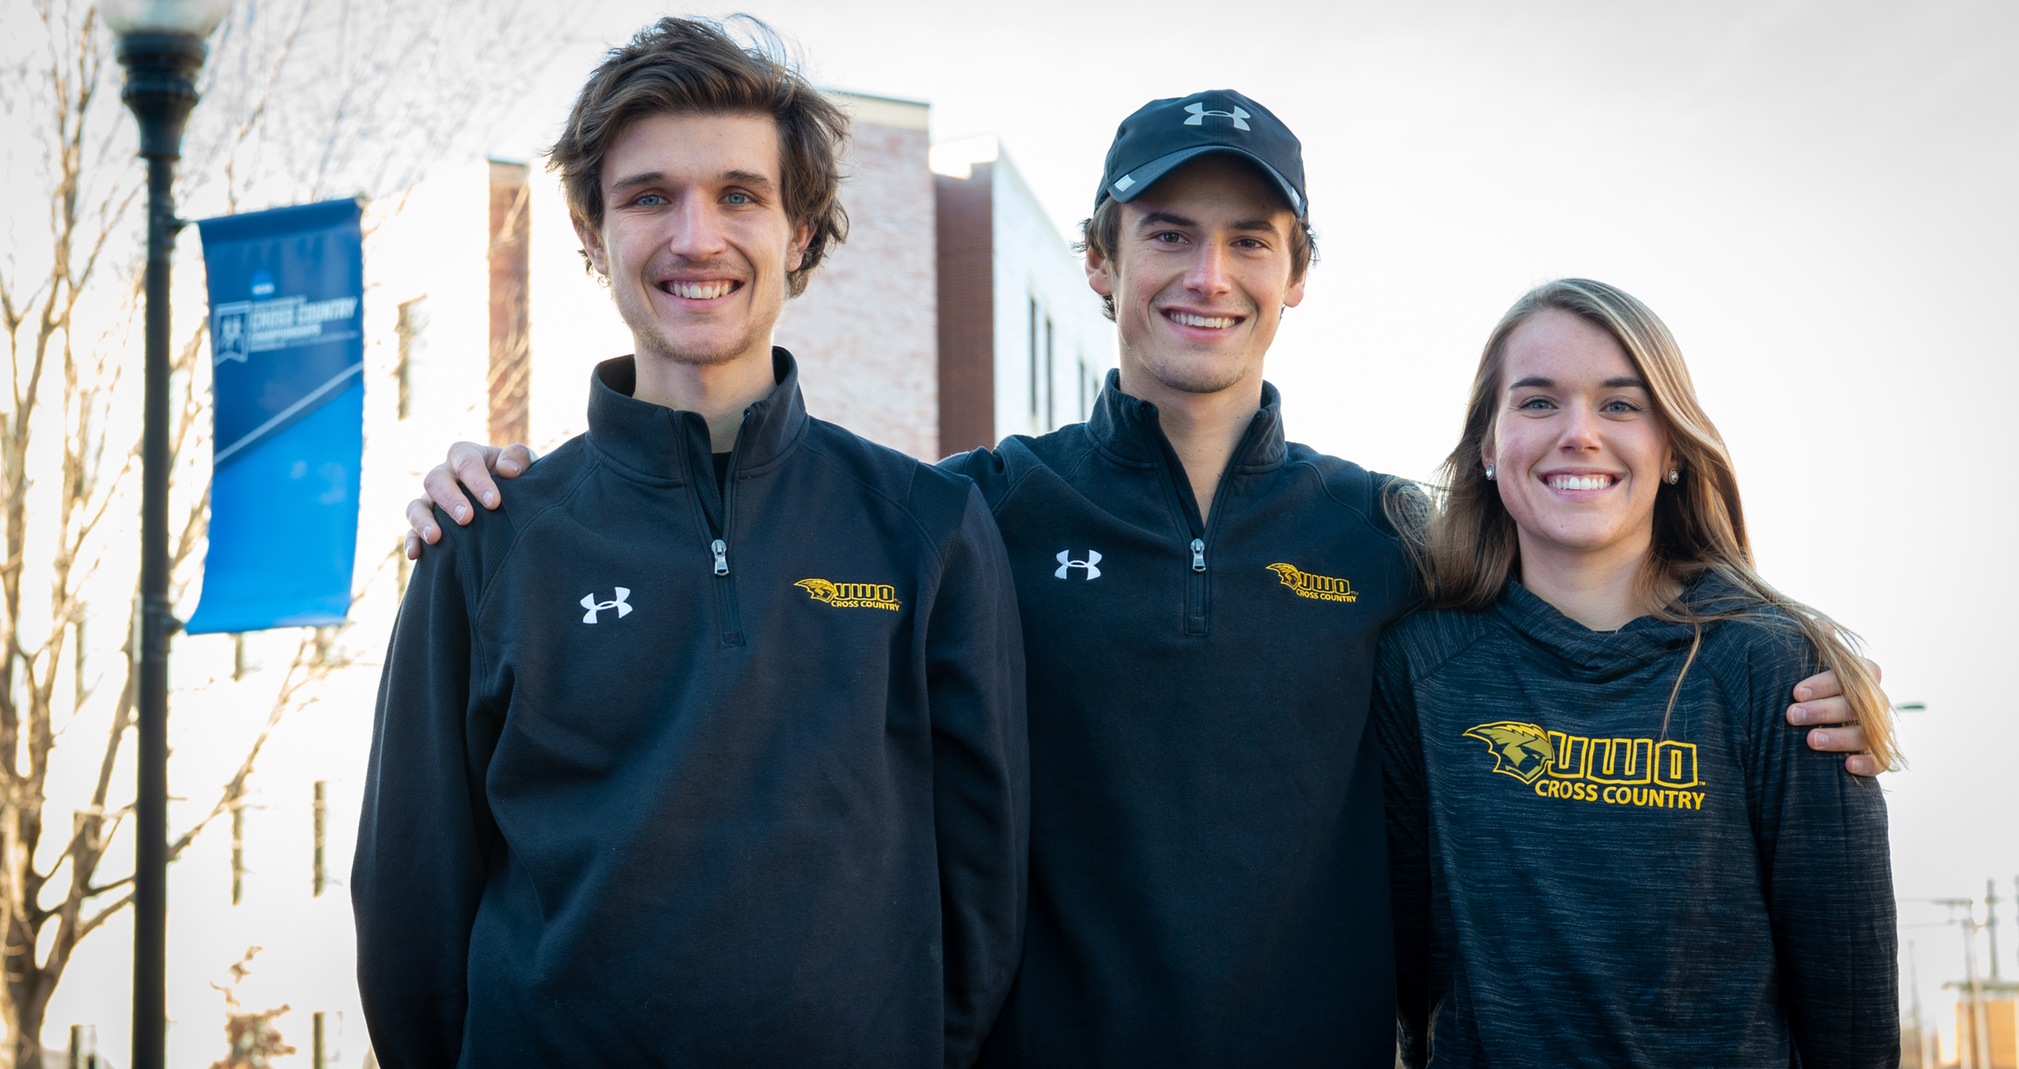 Three Titans To Race On Their Home Course For Nationals